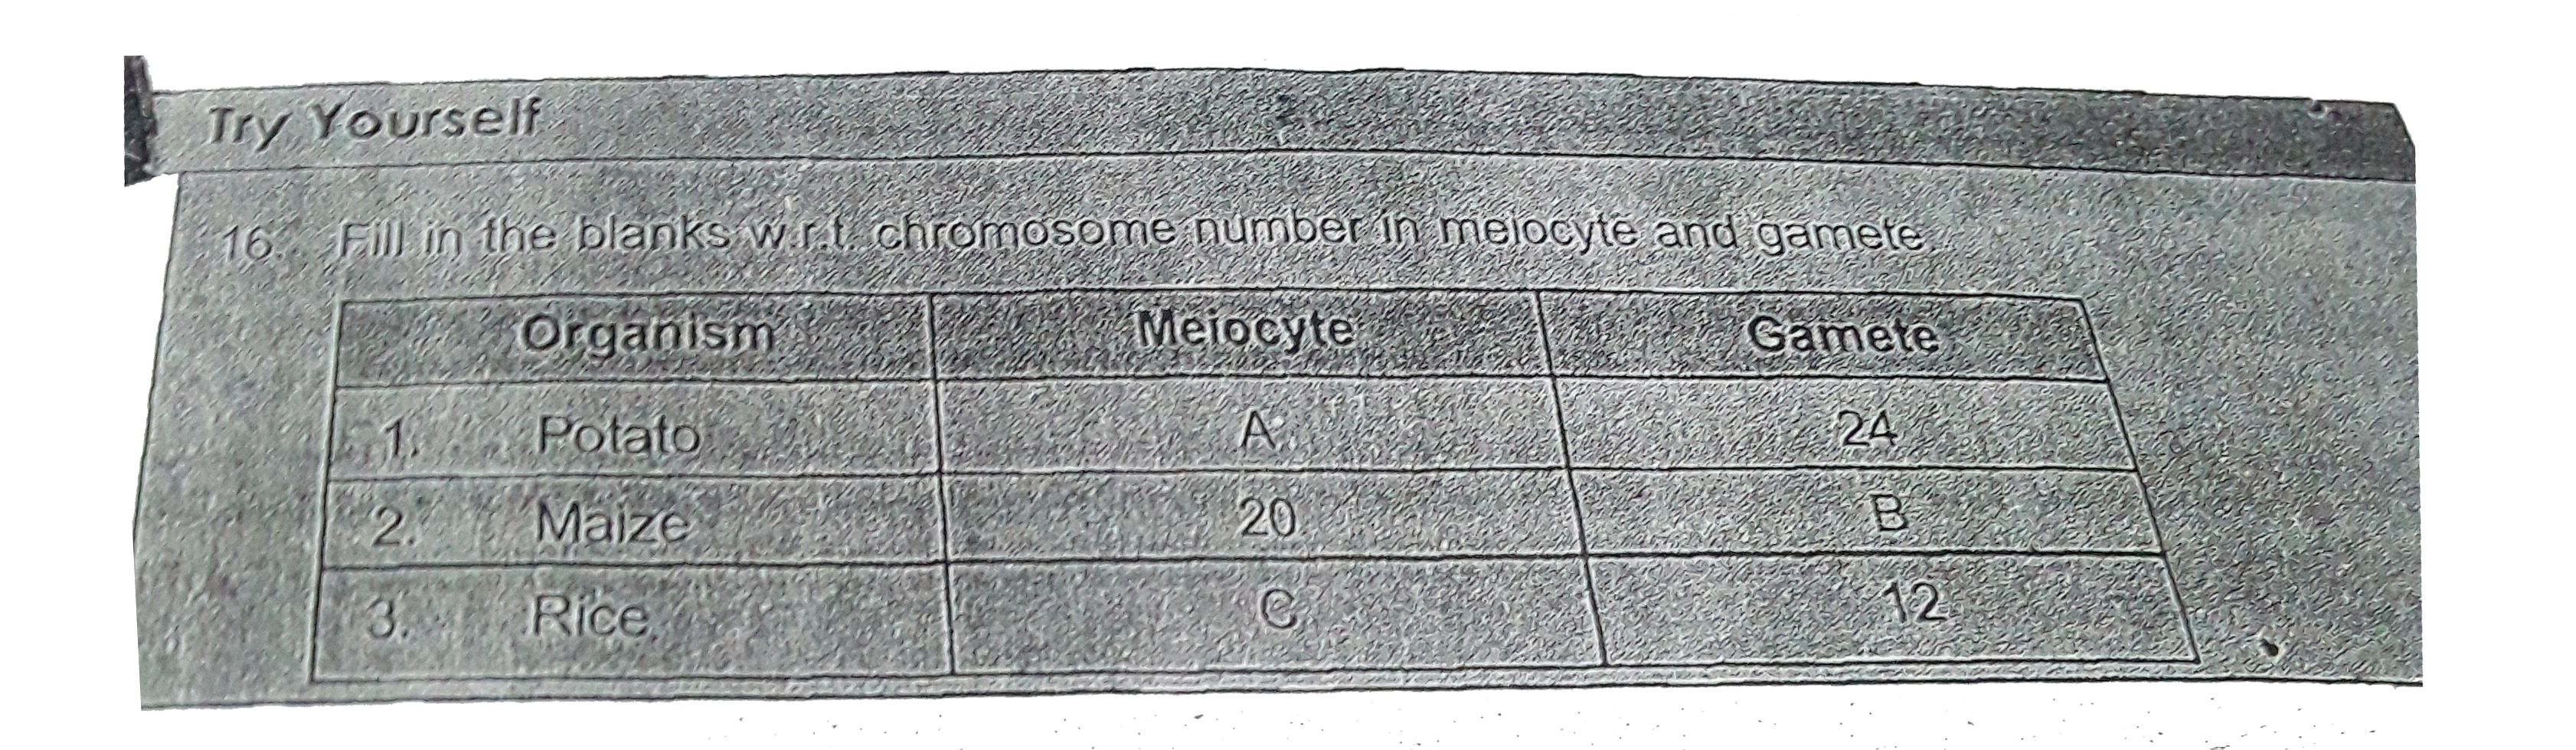 Fill in the blanks w.r.t chromosome number in meiocy and gamete